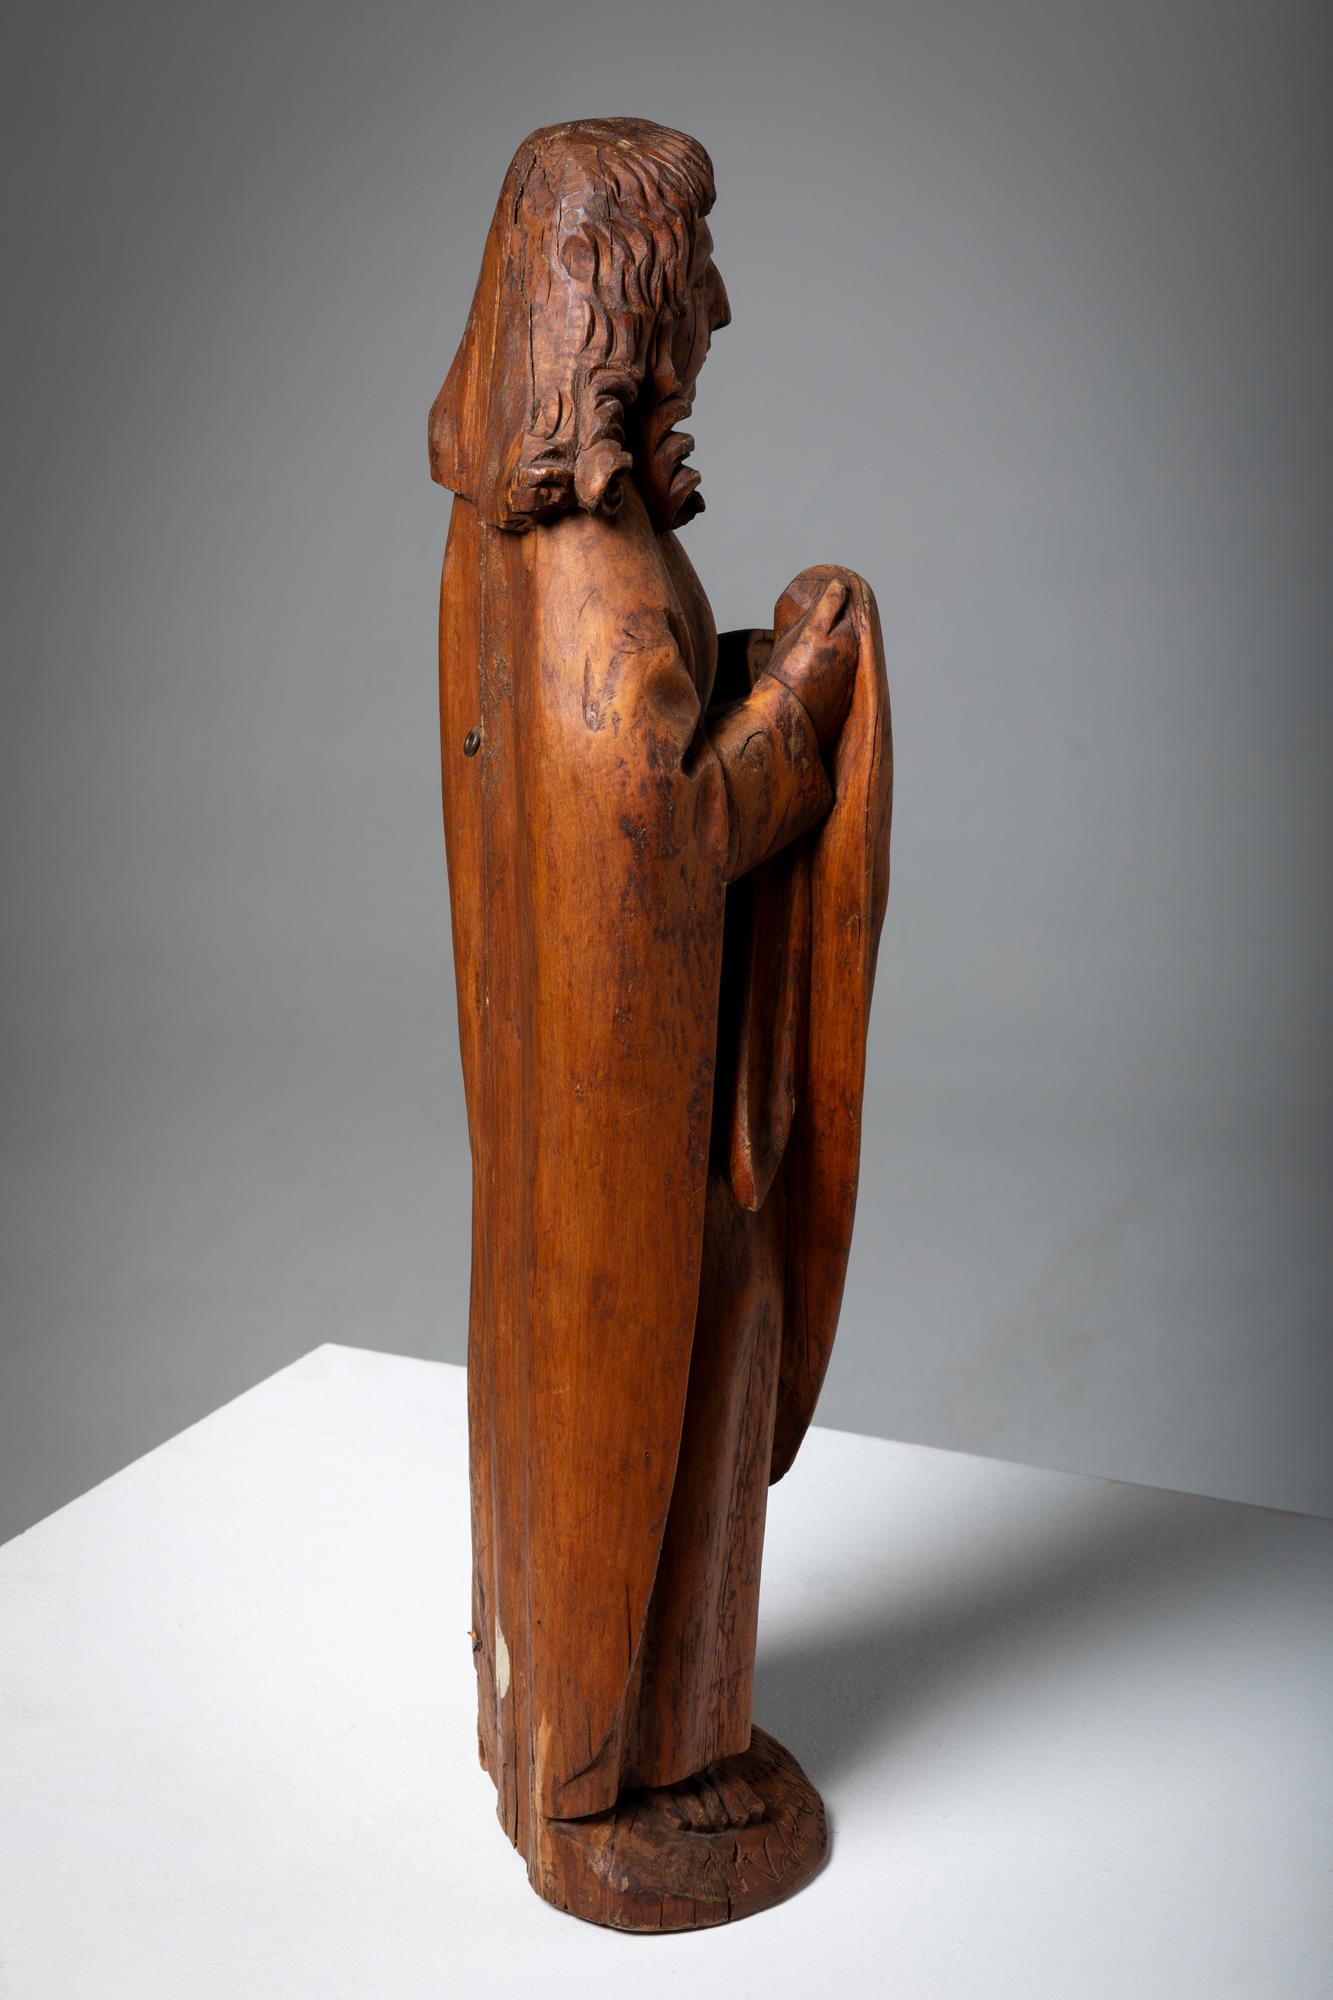 Hand-Crafted 16th Century Virgin Mary and Saint John, Pair of Linden Wood Sculptures For Sale